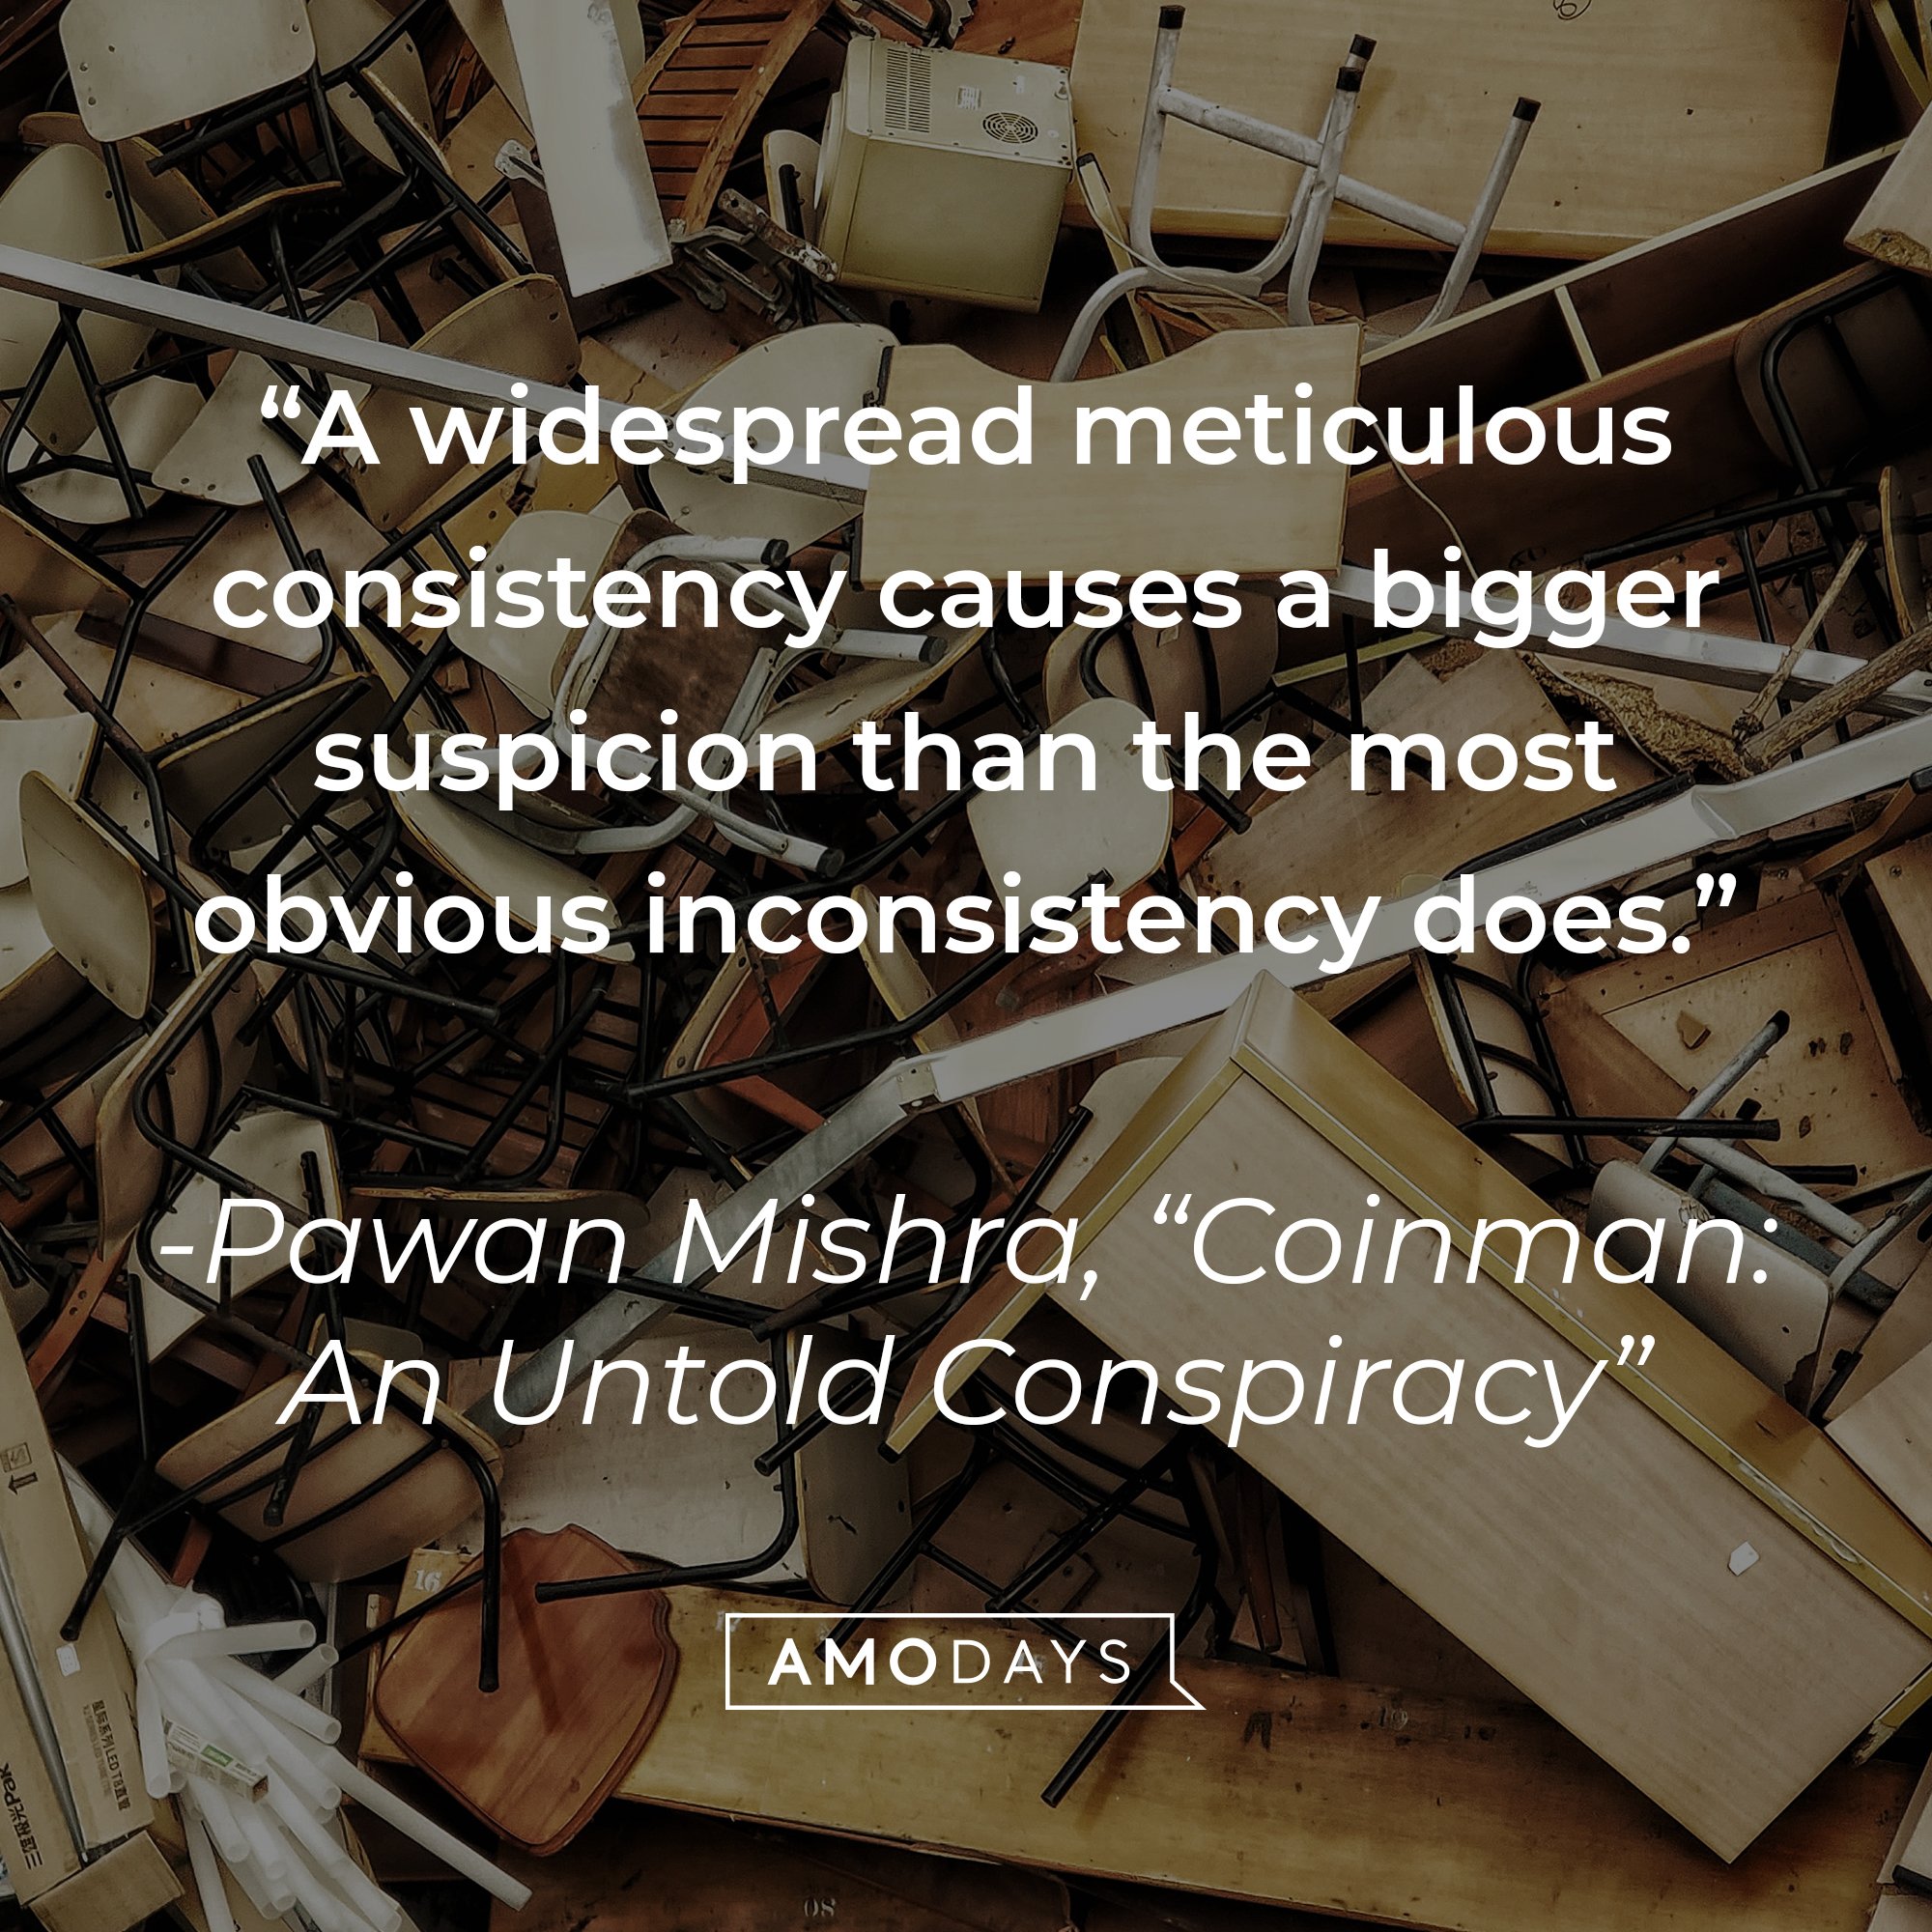 Pawan Mishra's "Coinman: An Untold Conspiracy" quote: "A widespread meticulous consistency causes a bigger suspicion than the most obvious inconsistency does." | Image: AmoDays